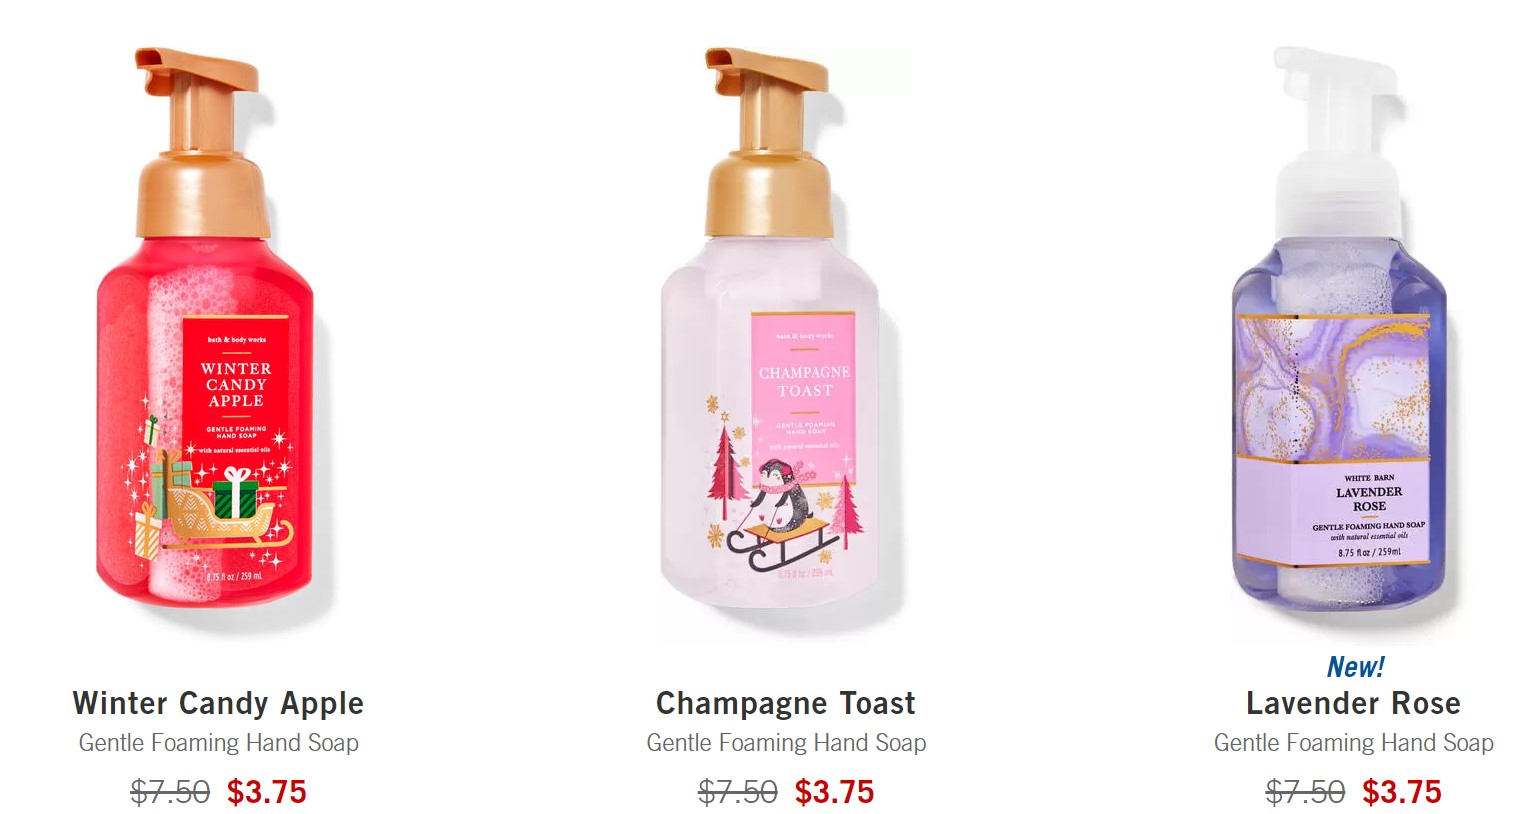 Bath and Body Works Semi-Annual Sale: $10 off of $40 Makes For KILLER Deals  (Hand Soaps $2.71 Each Shipped)